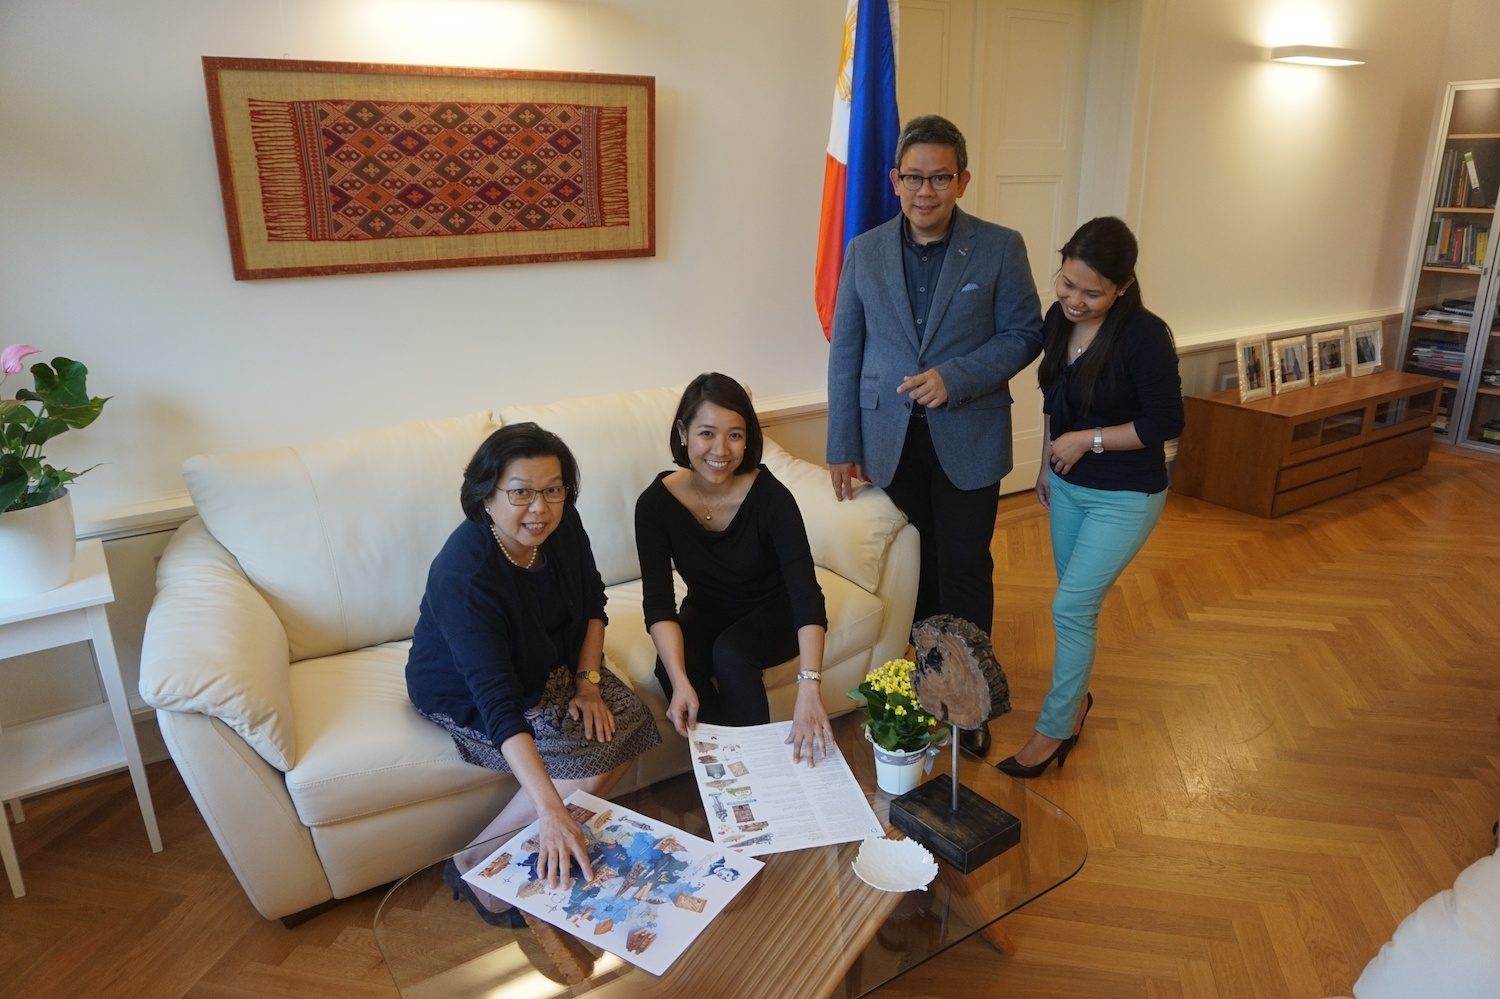 EMBASSY TEAM. Ambassador Sta. Maria-Thomeczek (L) and Consul Adrian Cruz (2nd from R) with staff members of the Philippine Embassy in Berlin finalizing some details on the map. Photo by Carol Ramoran 